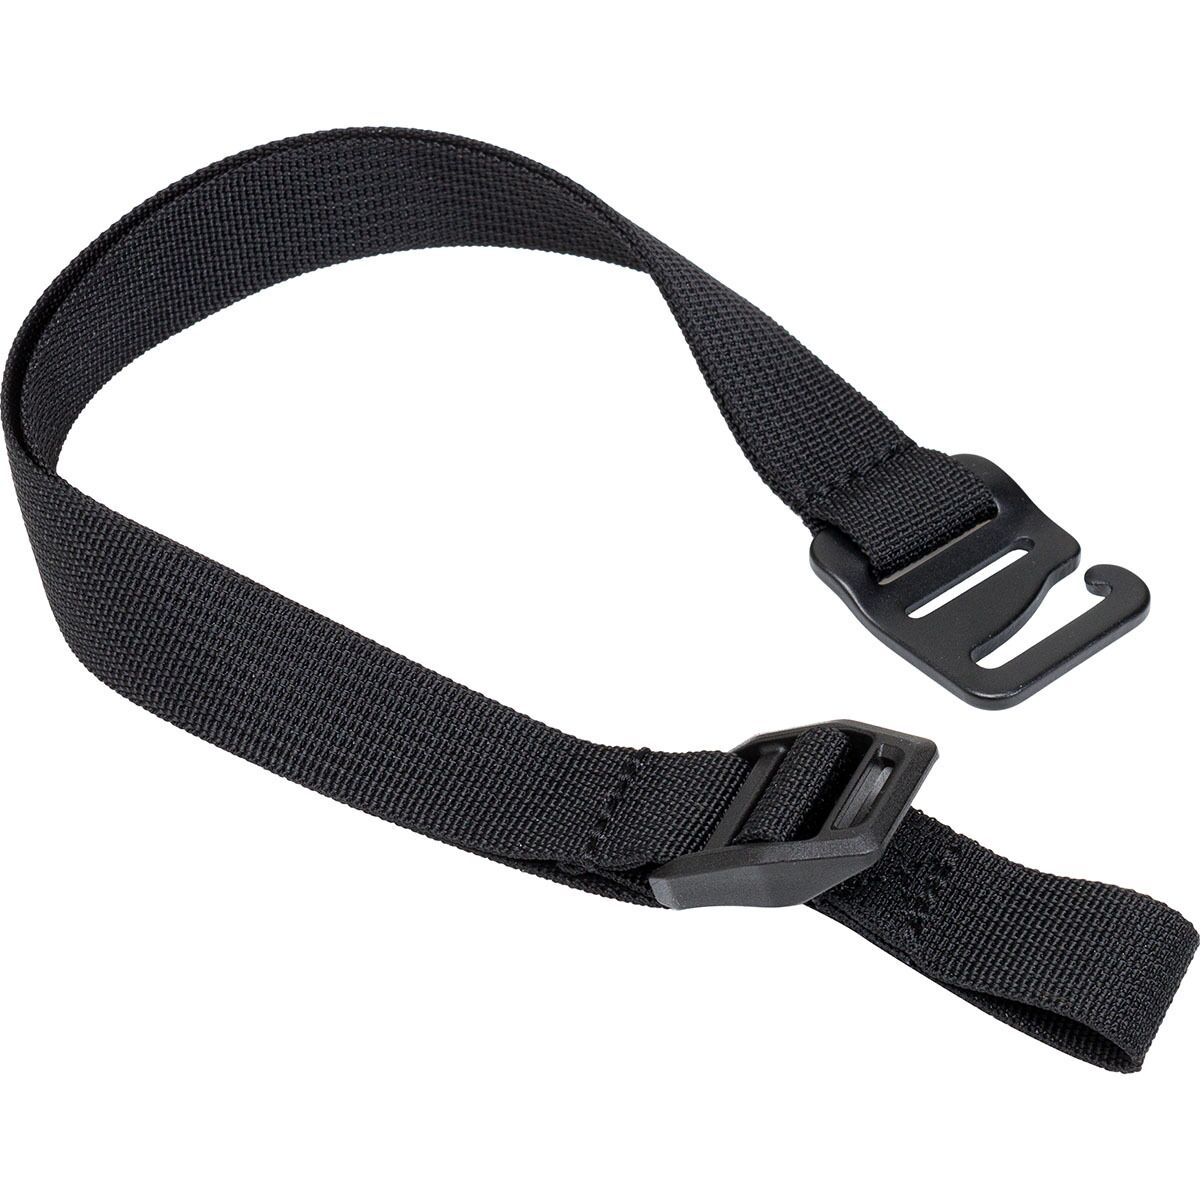 ABS Avalanche Rescue Devices A.Light Diagonal Ski Holding Strap